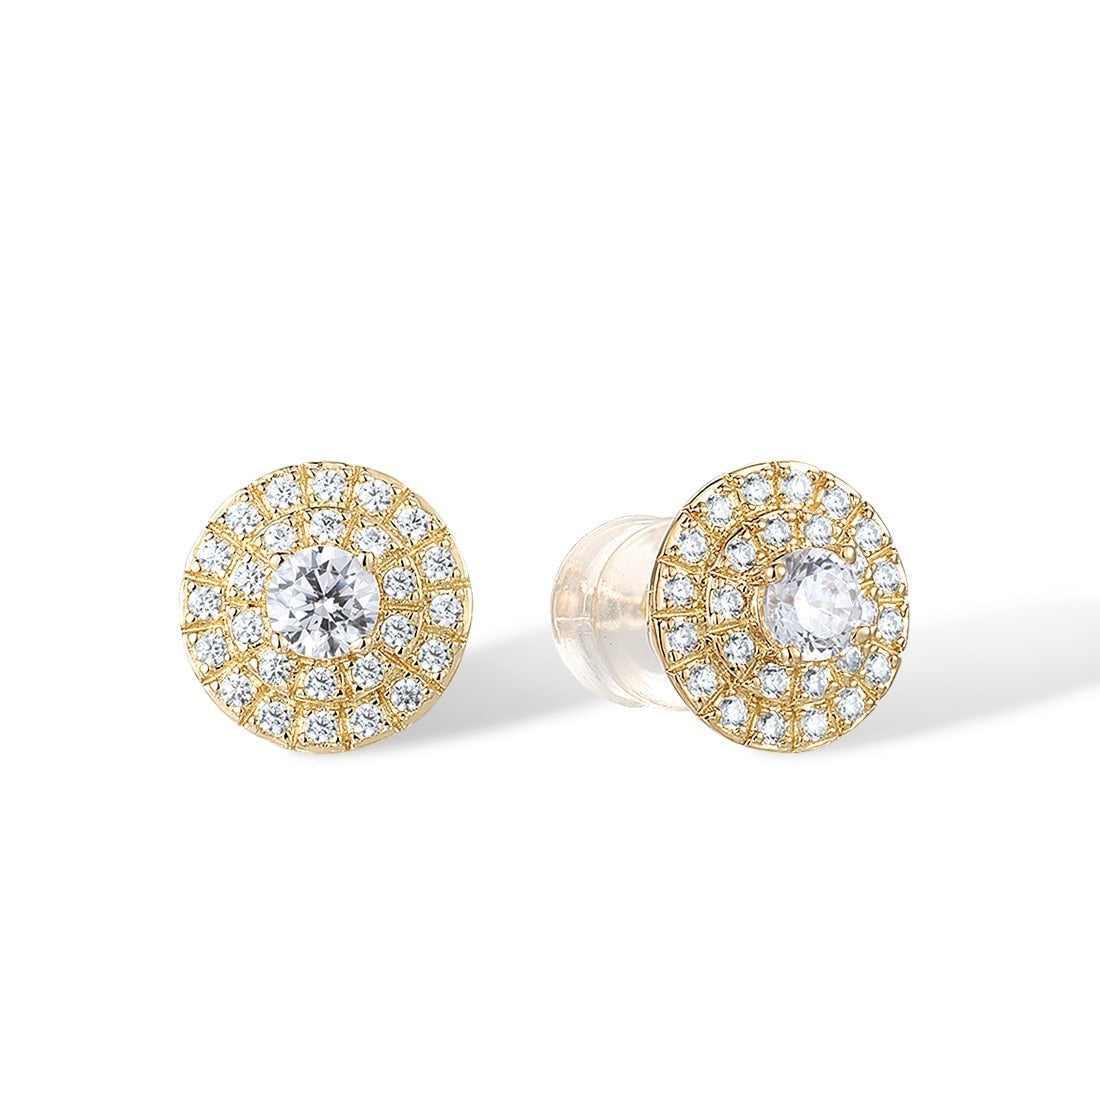 9K 375 Yellow Gold Sparkling White Cubic Zirconia Stud Earrings